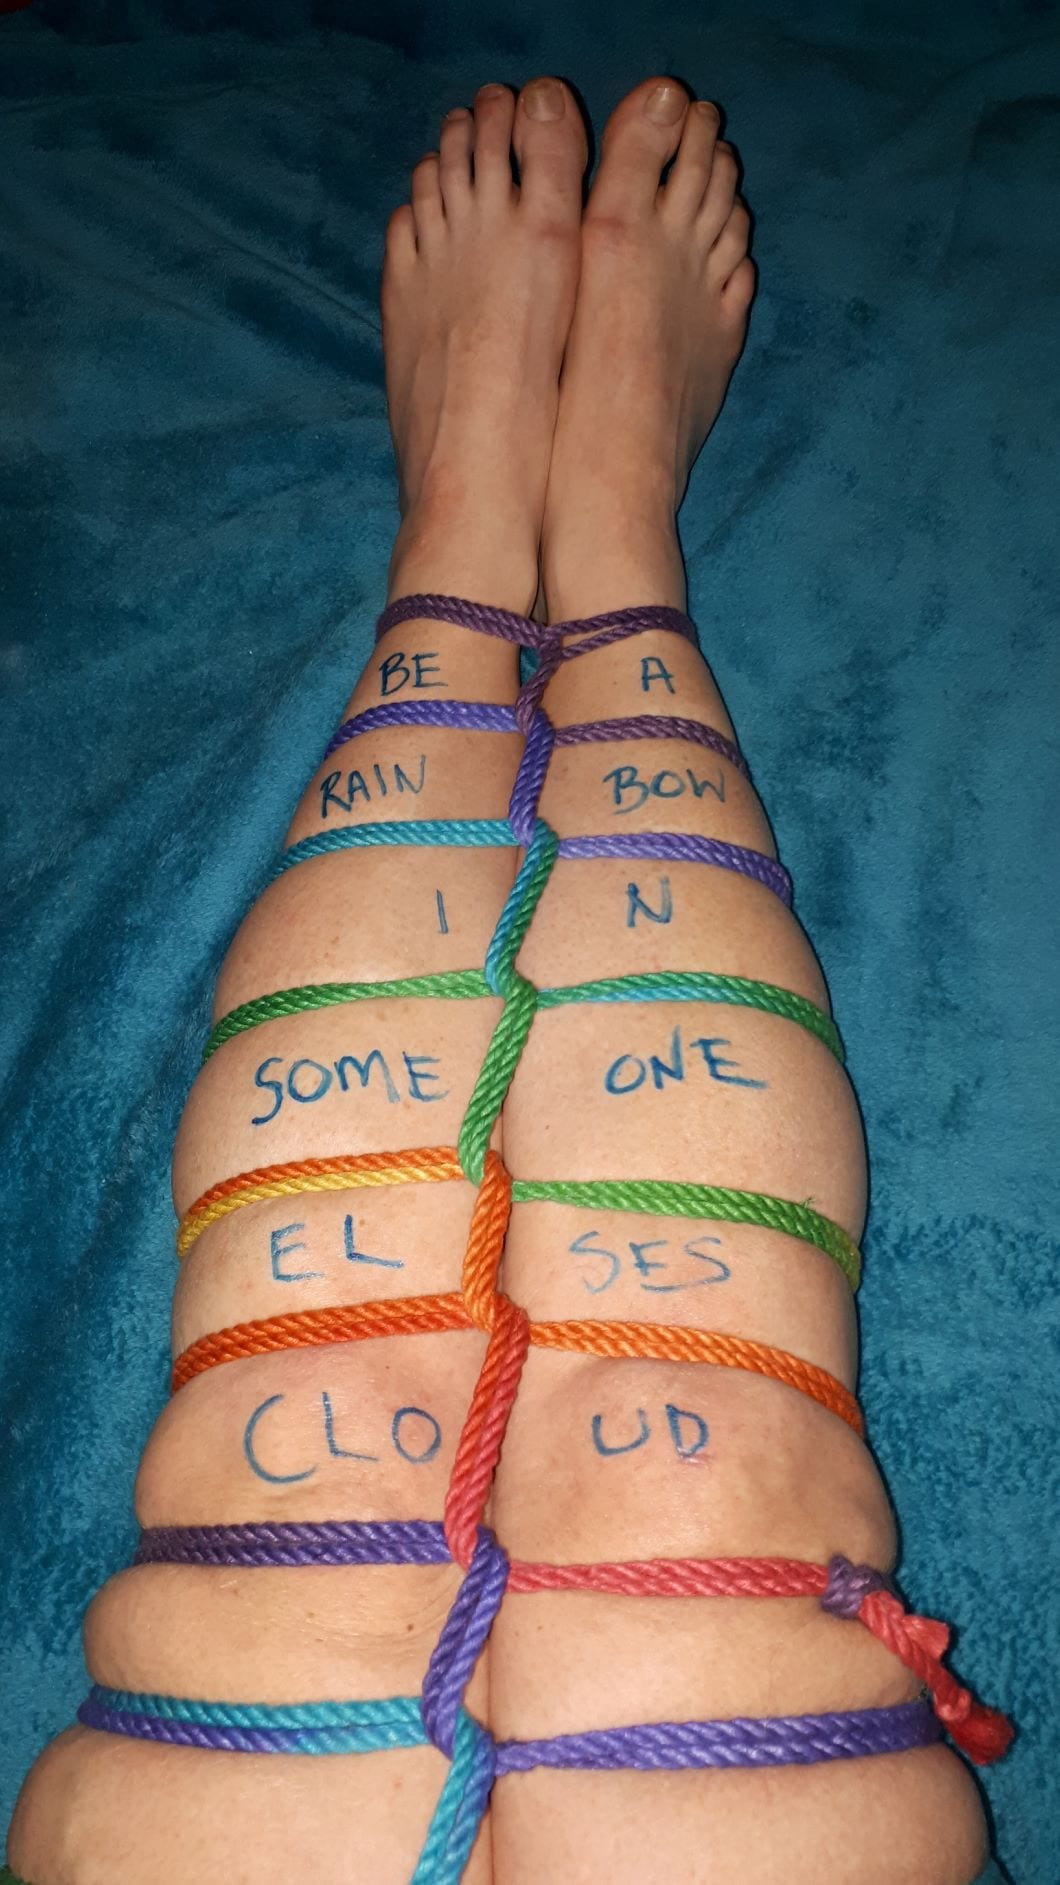 Bare legs bound in rainbow rope with the quote "Be a rainbow in someone else's cloud" written on the shins